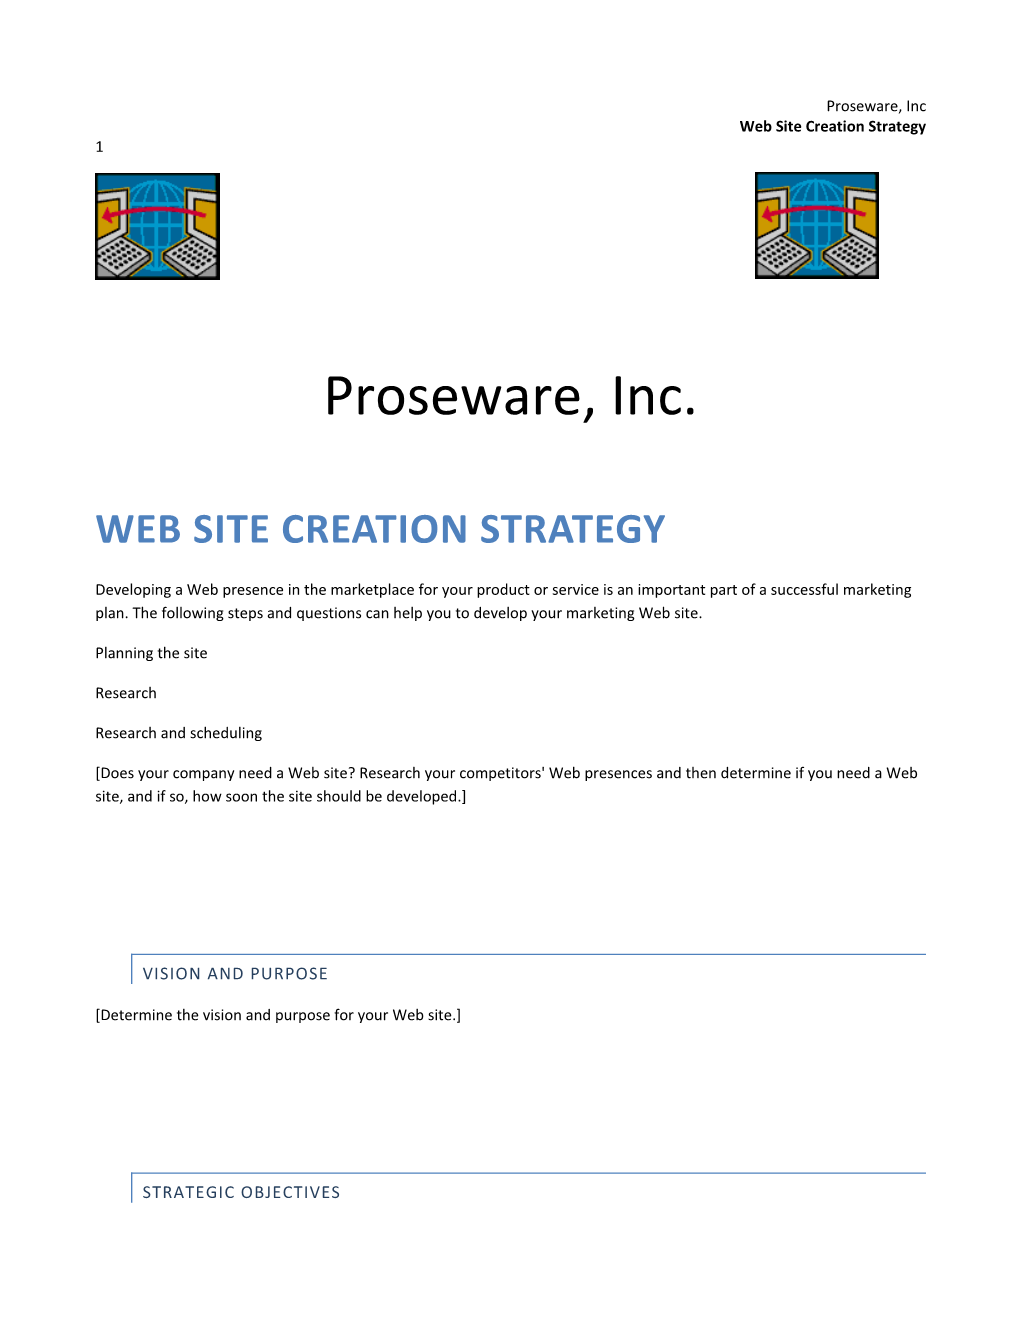 Web Site Creation Strategy